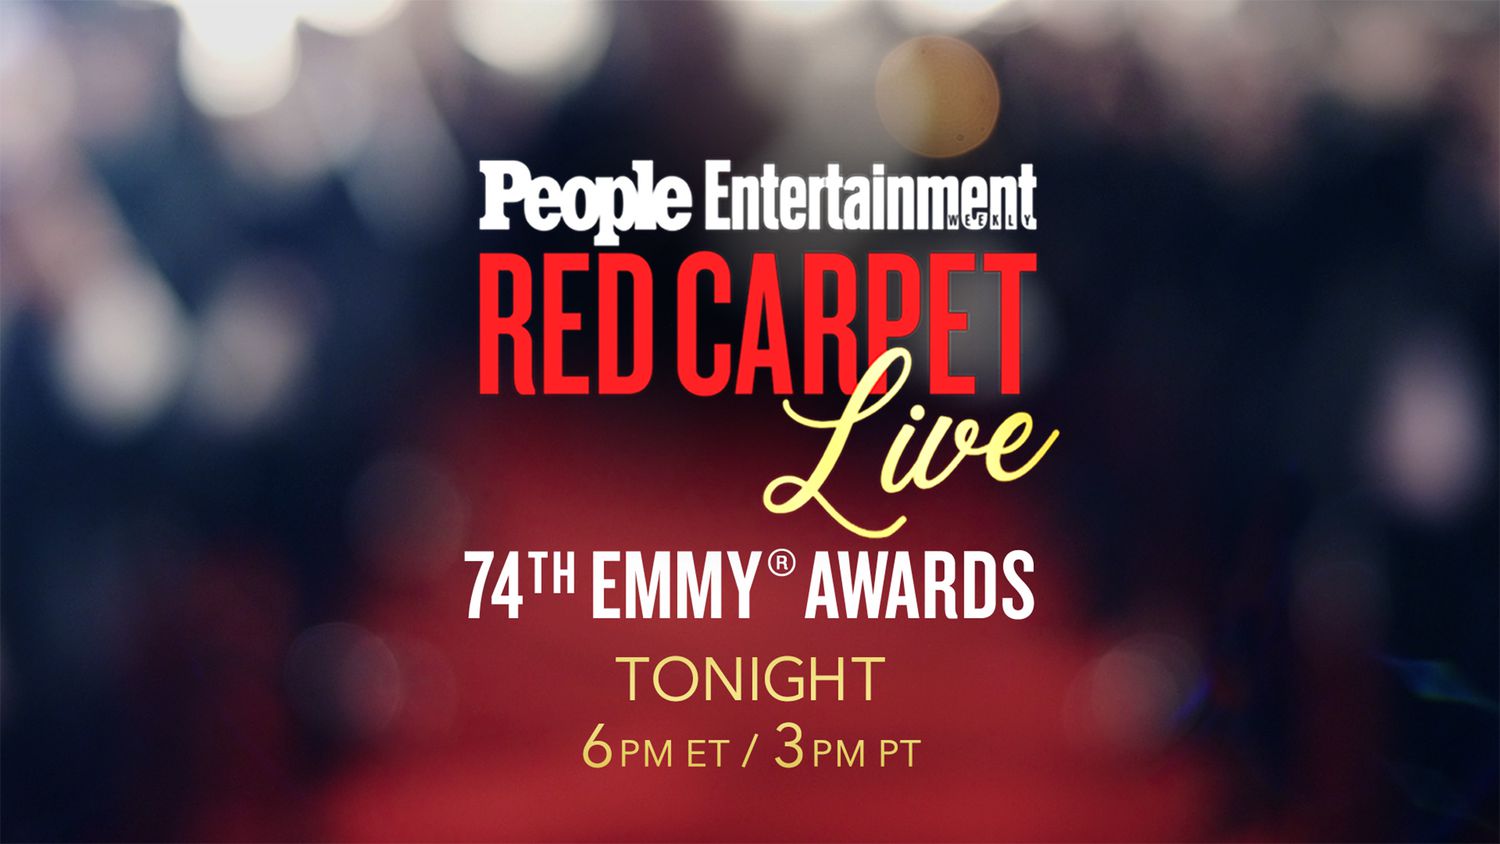 People Entertainment Weekly Emmy Red Carpet Live tout